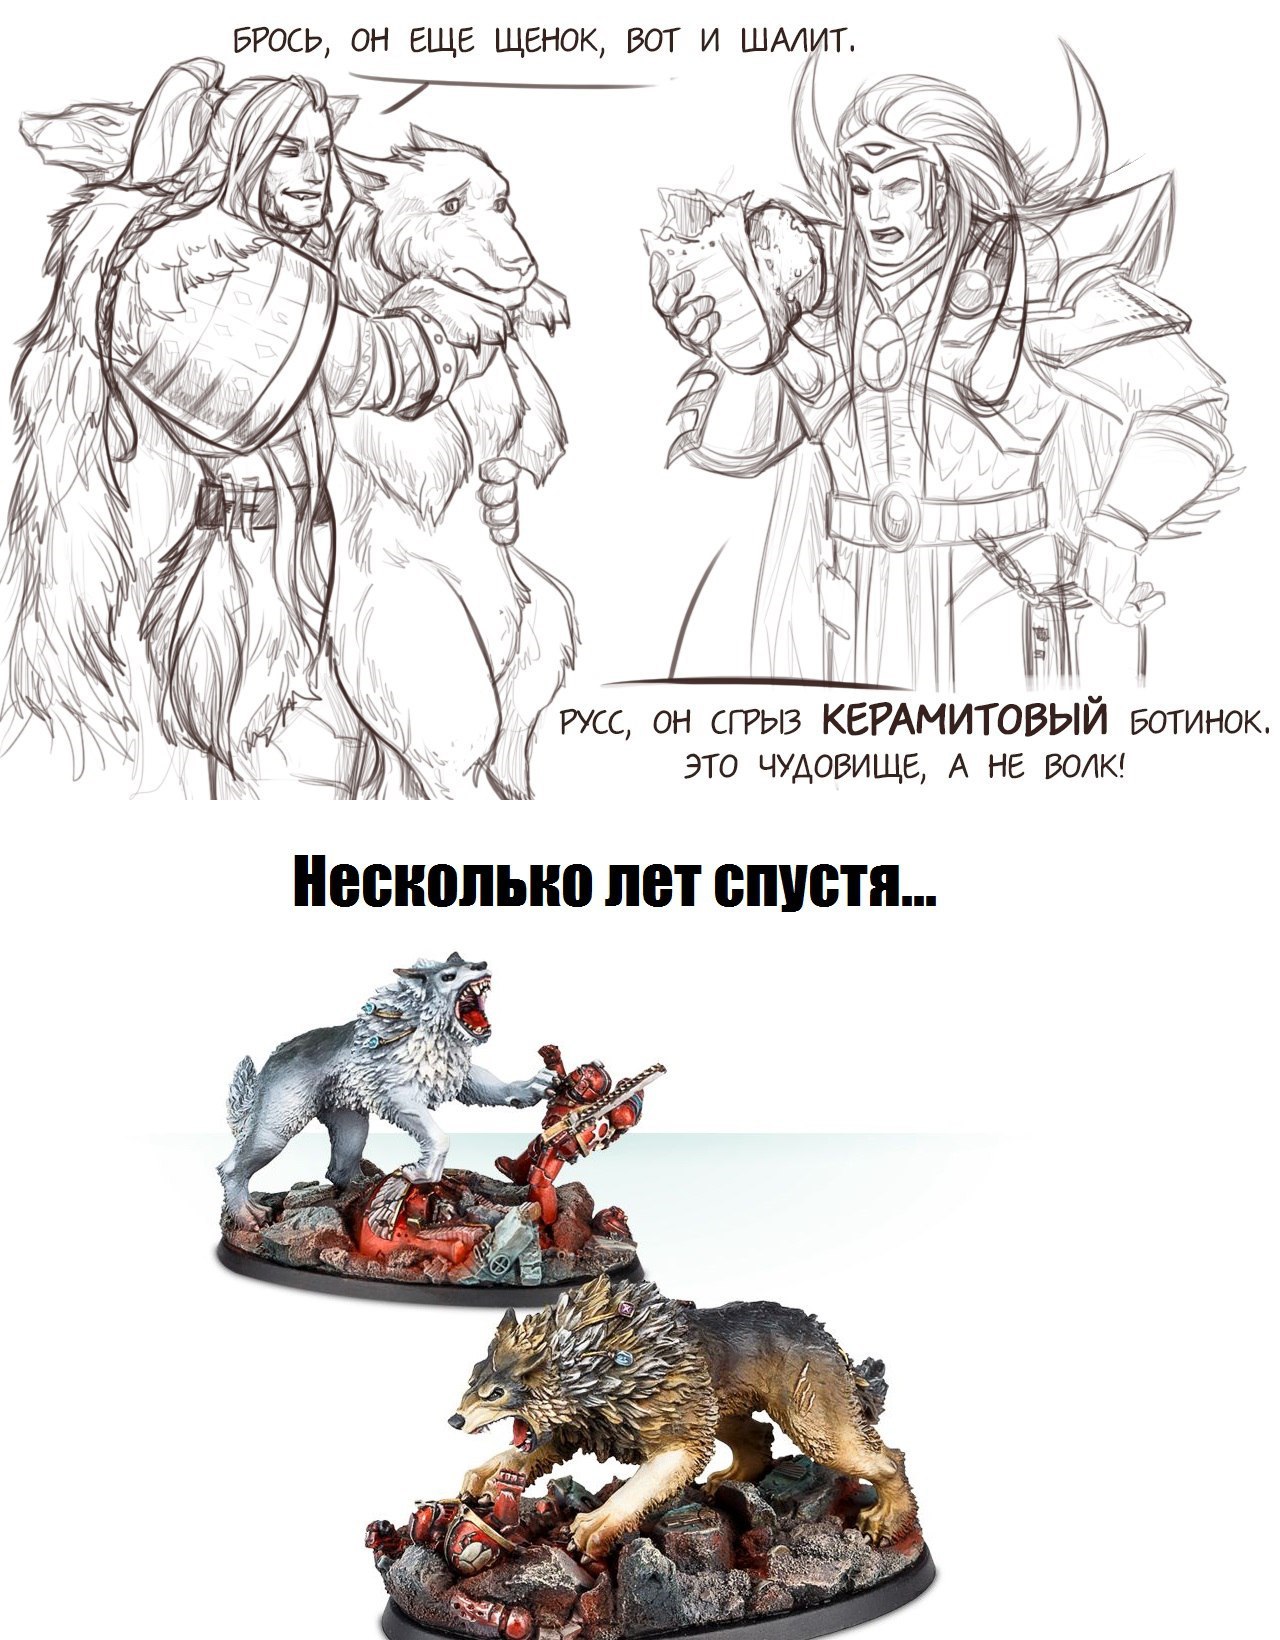 About pets. - Warhammer 40k, Leman Russ, Magnus the red, Humor